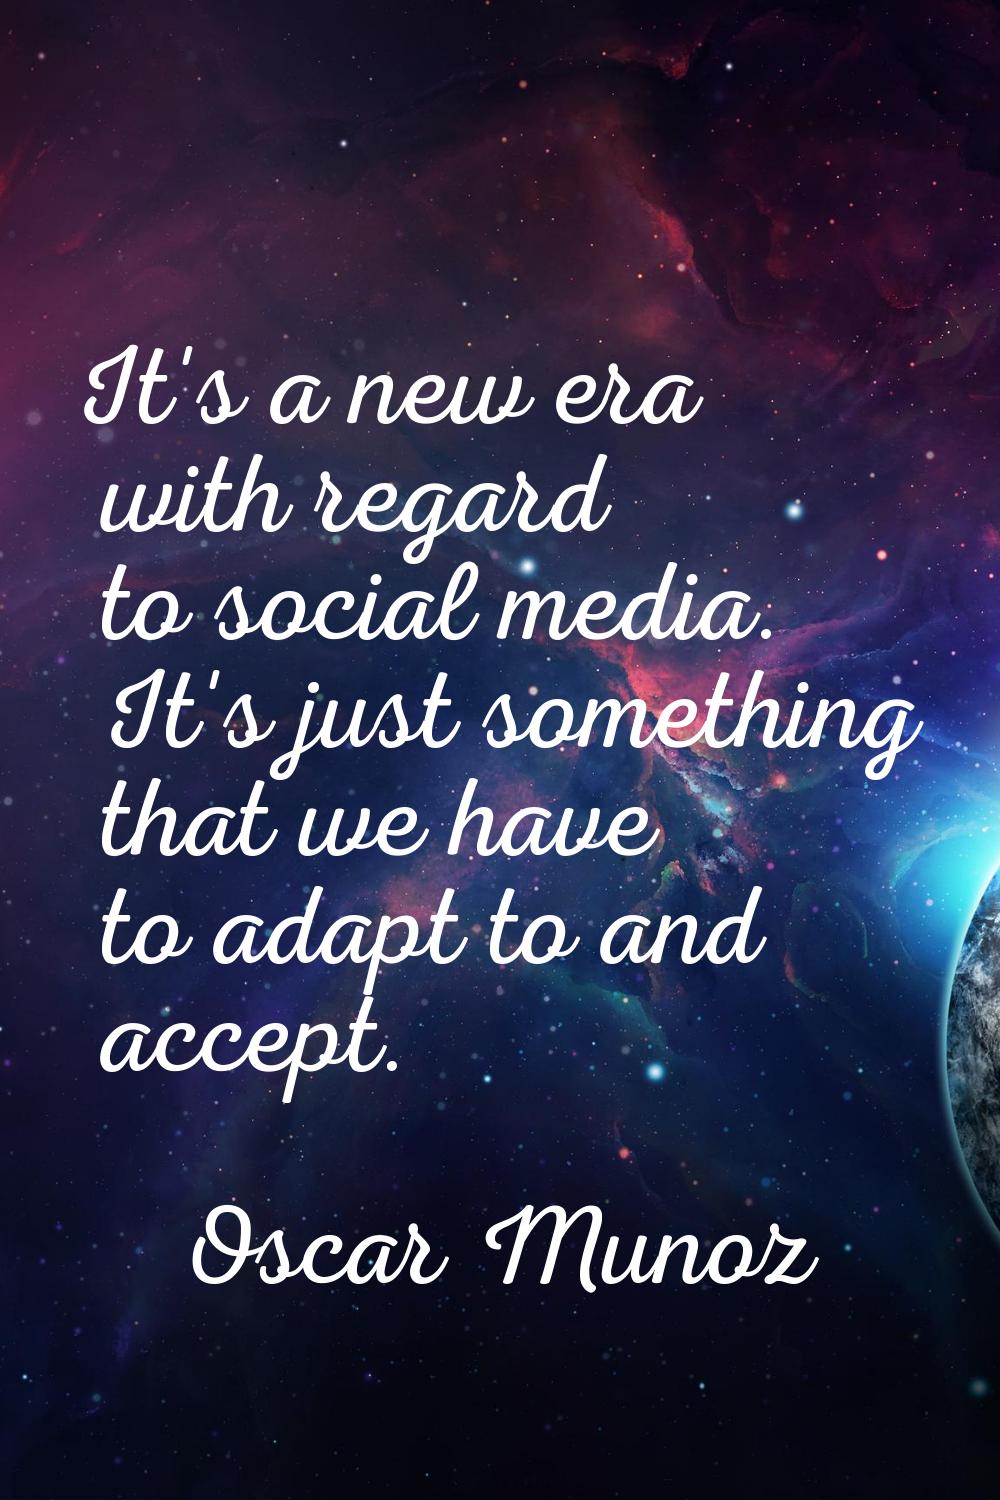 It's a new era with regard to social media. It's just something that we have to adapt to and accept